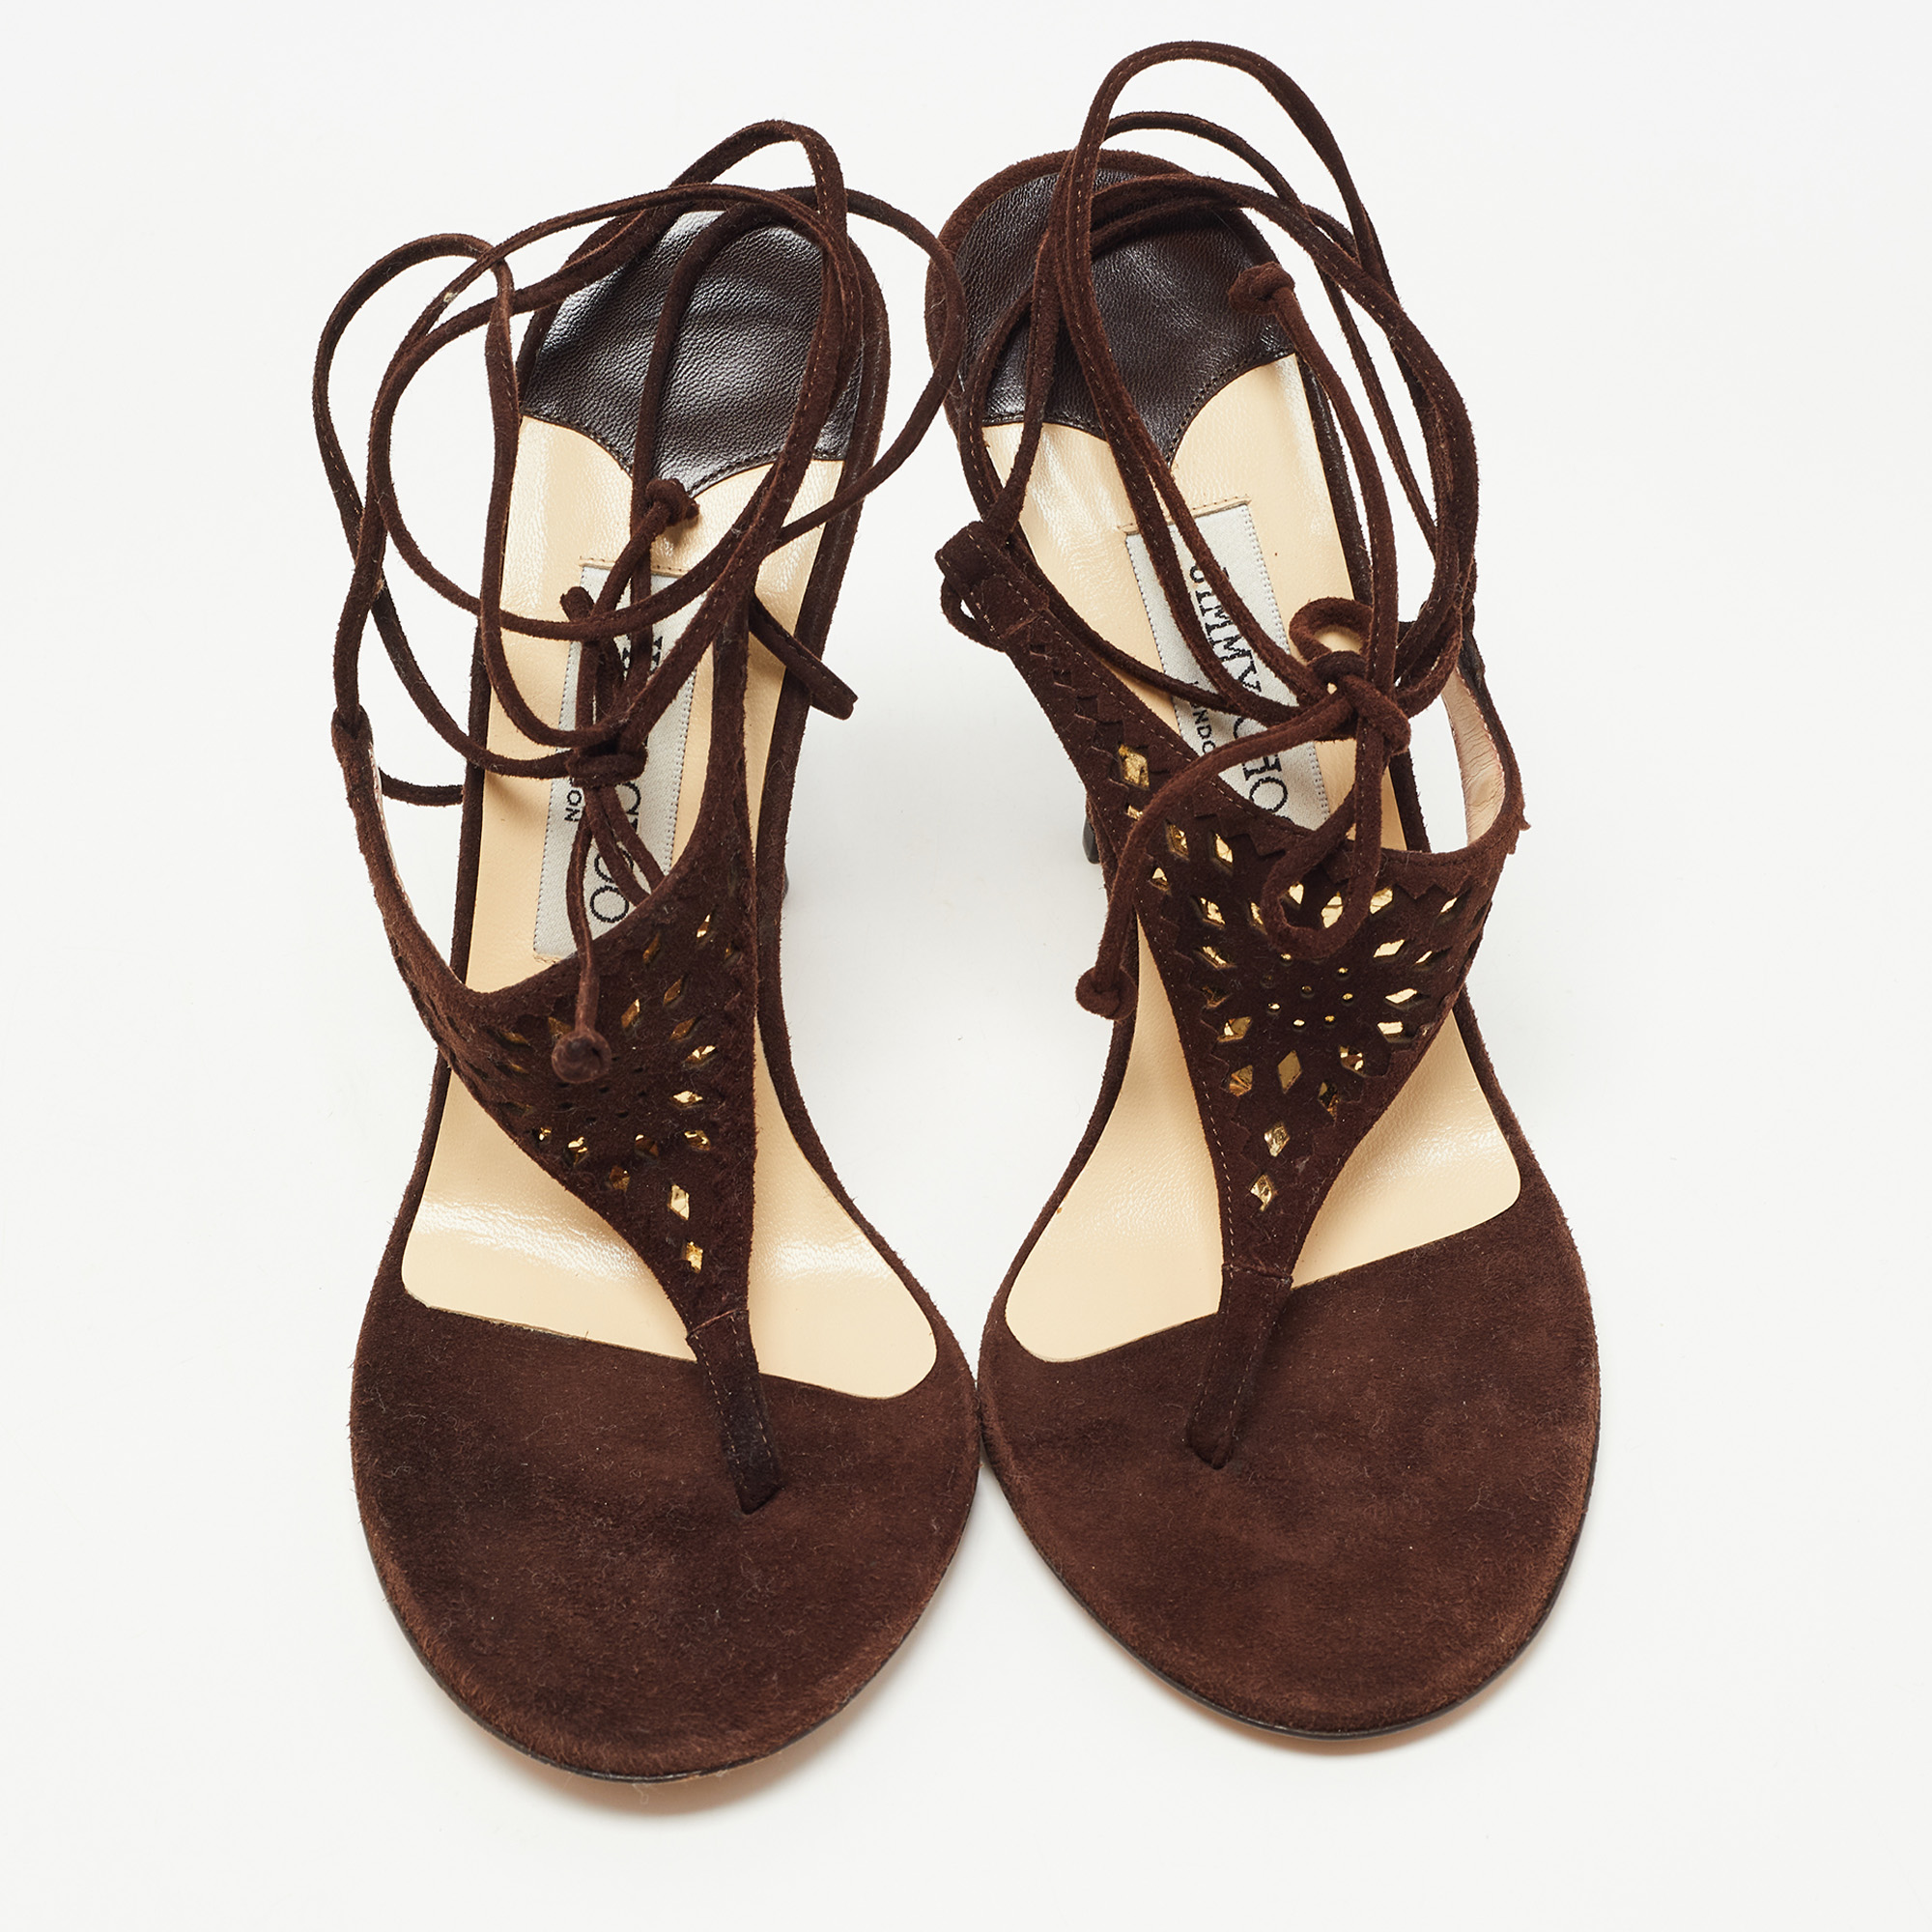 Jimmy Choo Brown Laser Cut Suede Ankle Tie Thong Sandals Size 39.5